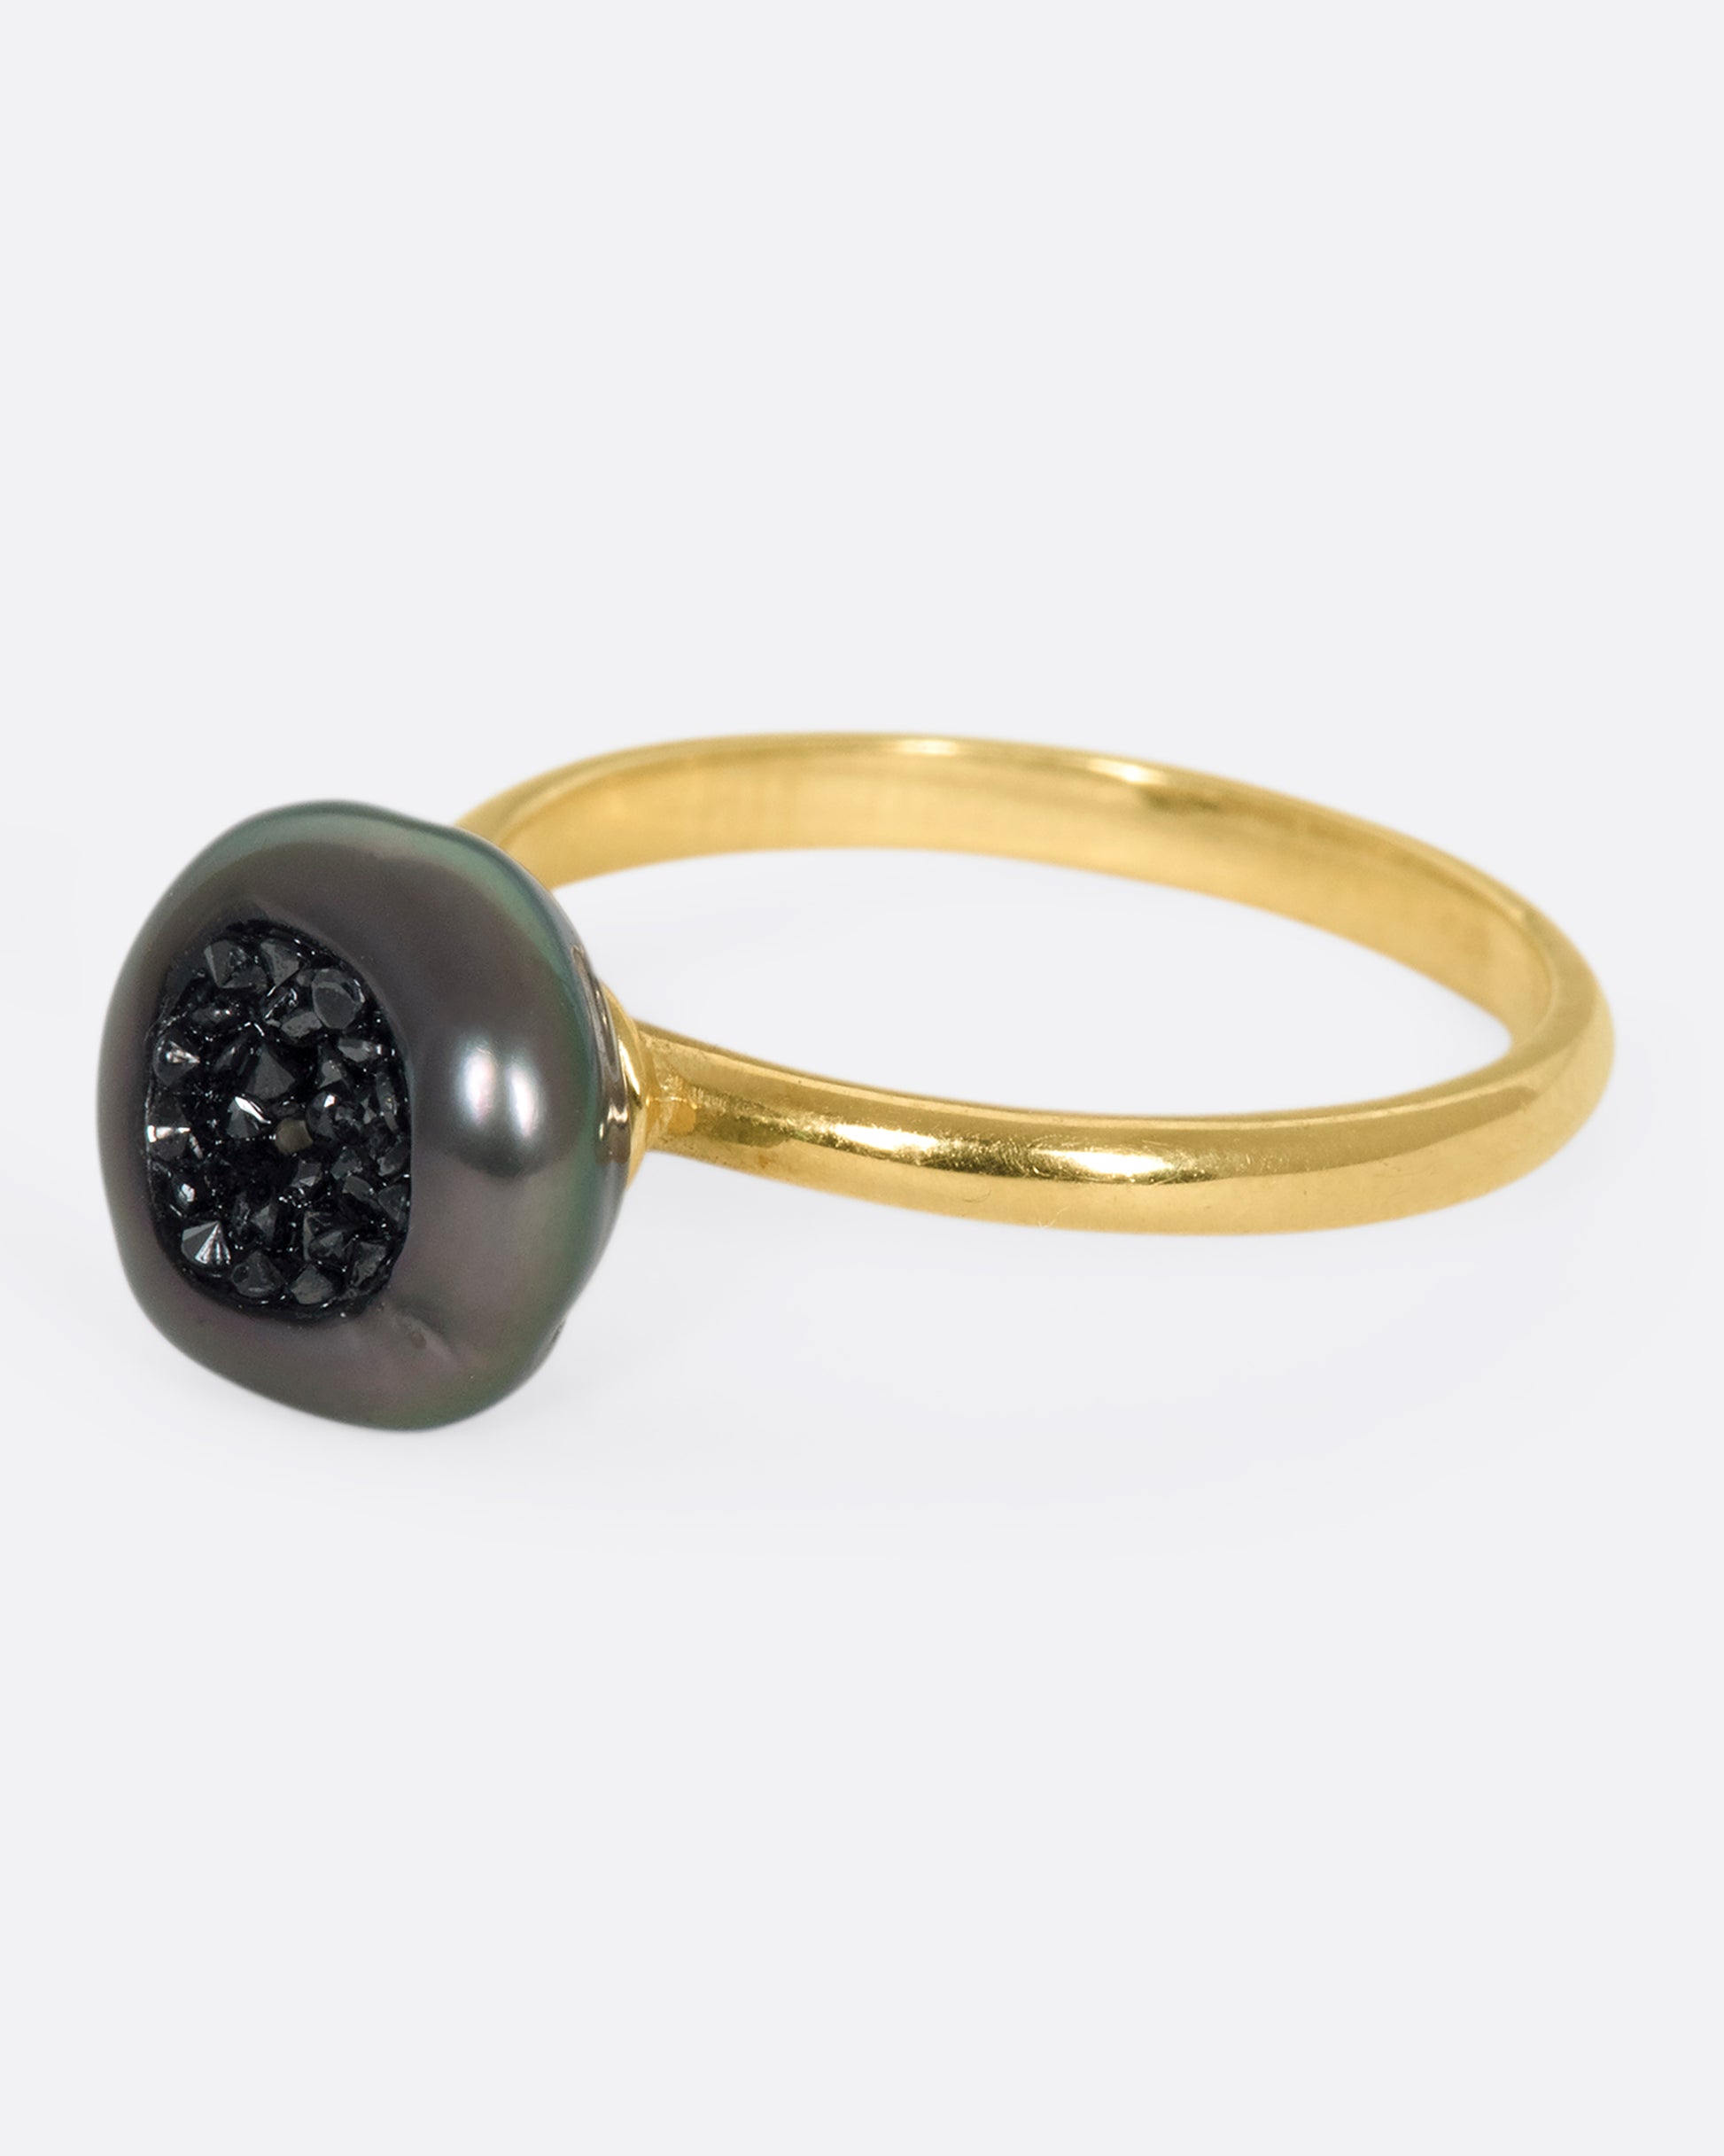 A 14k gold band with a carved Tahitian keshi pearl lined with black diamonds